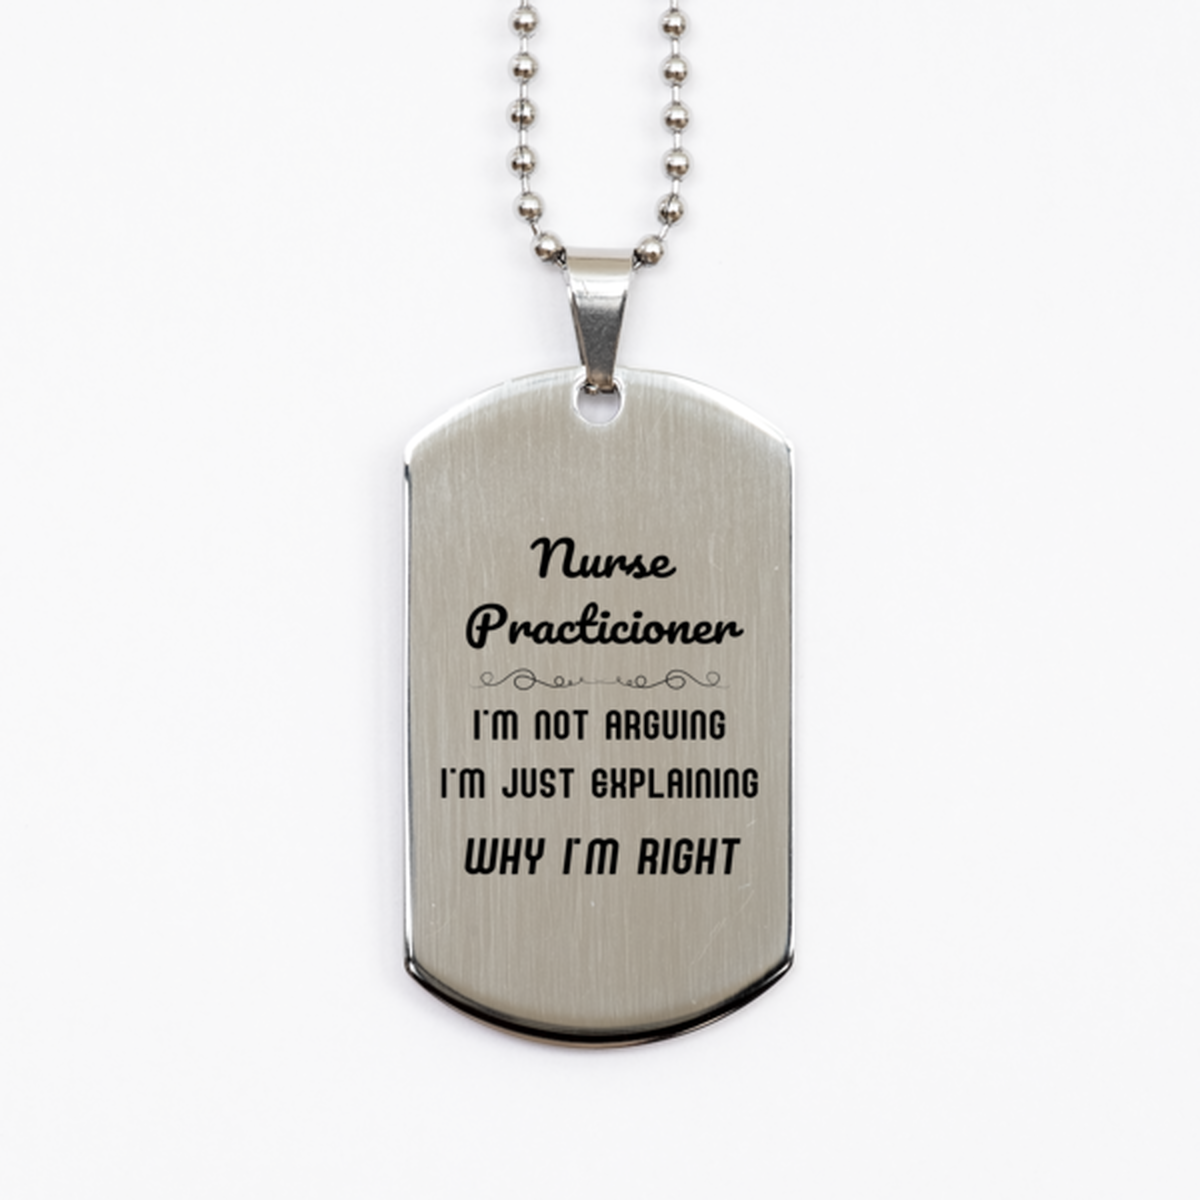 Nurse Practicioner I'm not Arguing. I'm Just Explaining Why I'm RIGHT Silver Dog Tag, Funny Saying Quote Nurse Practicioner Gifts For Nurse Practicioner Graduation Birthday Christmas Gifts for Men Women Coworker